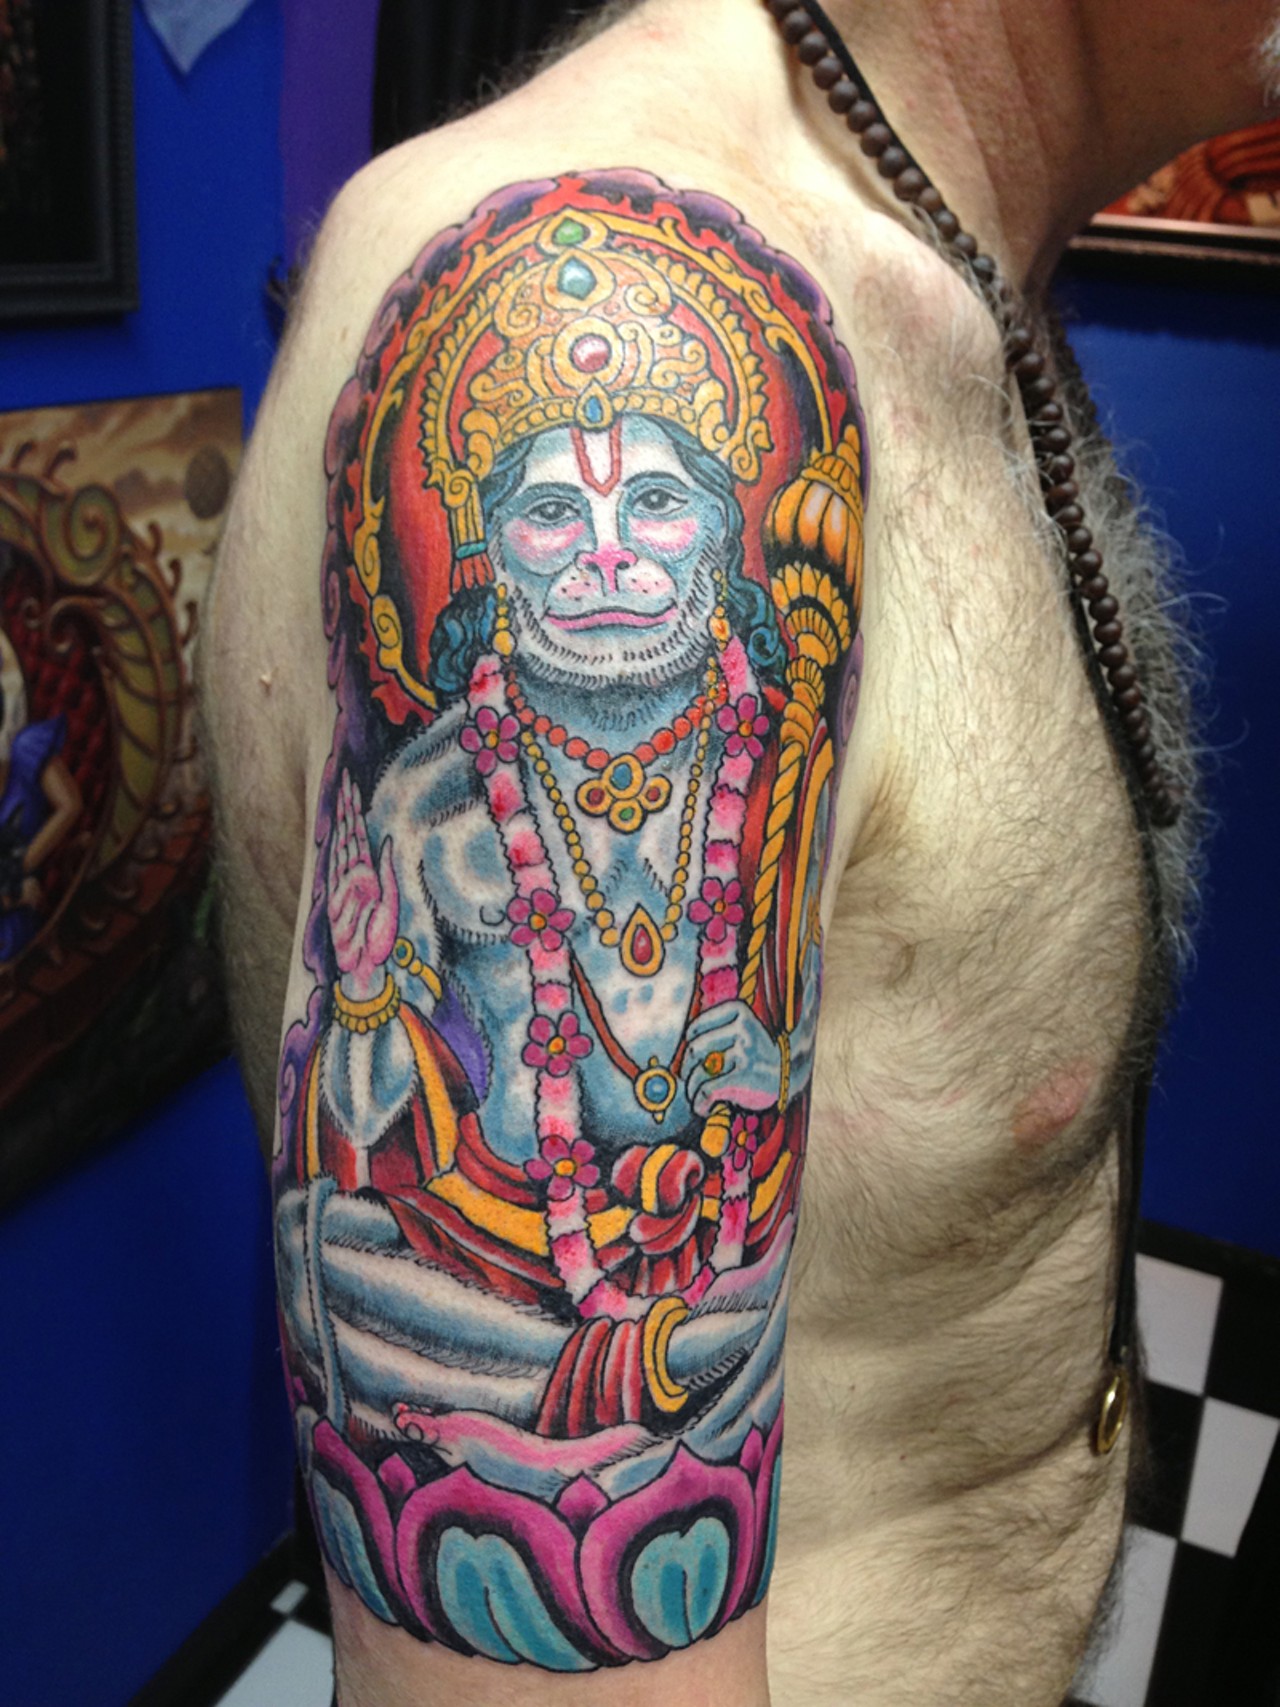 Altered Tattoo Co  Jason finished this up last Friday Half healedfresh  Thanks for taking a look  Facebook